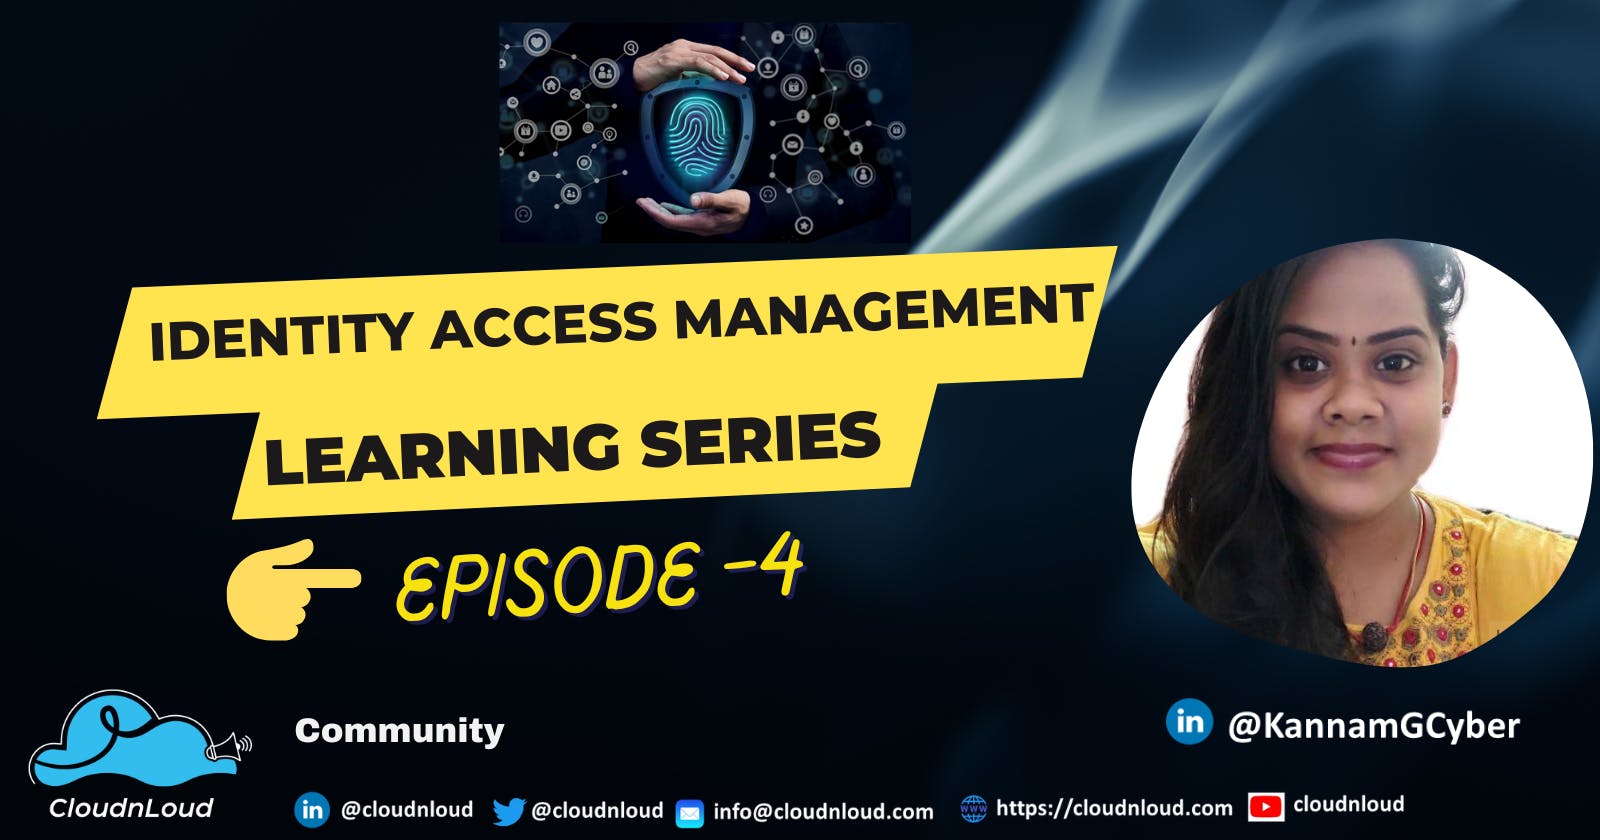 Identity Access Management Series - Episode 4